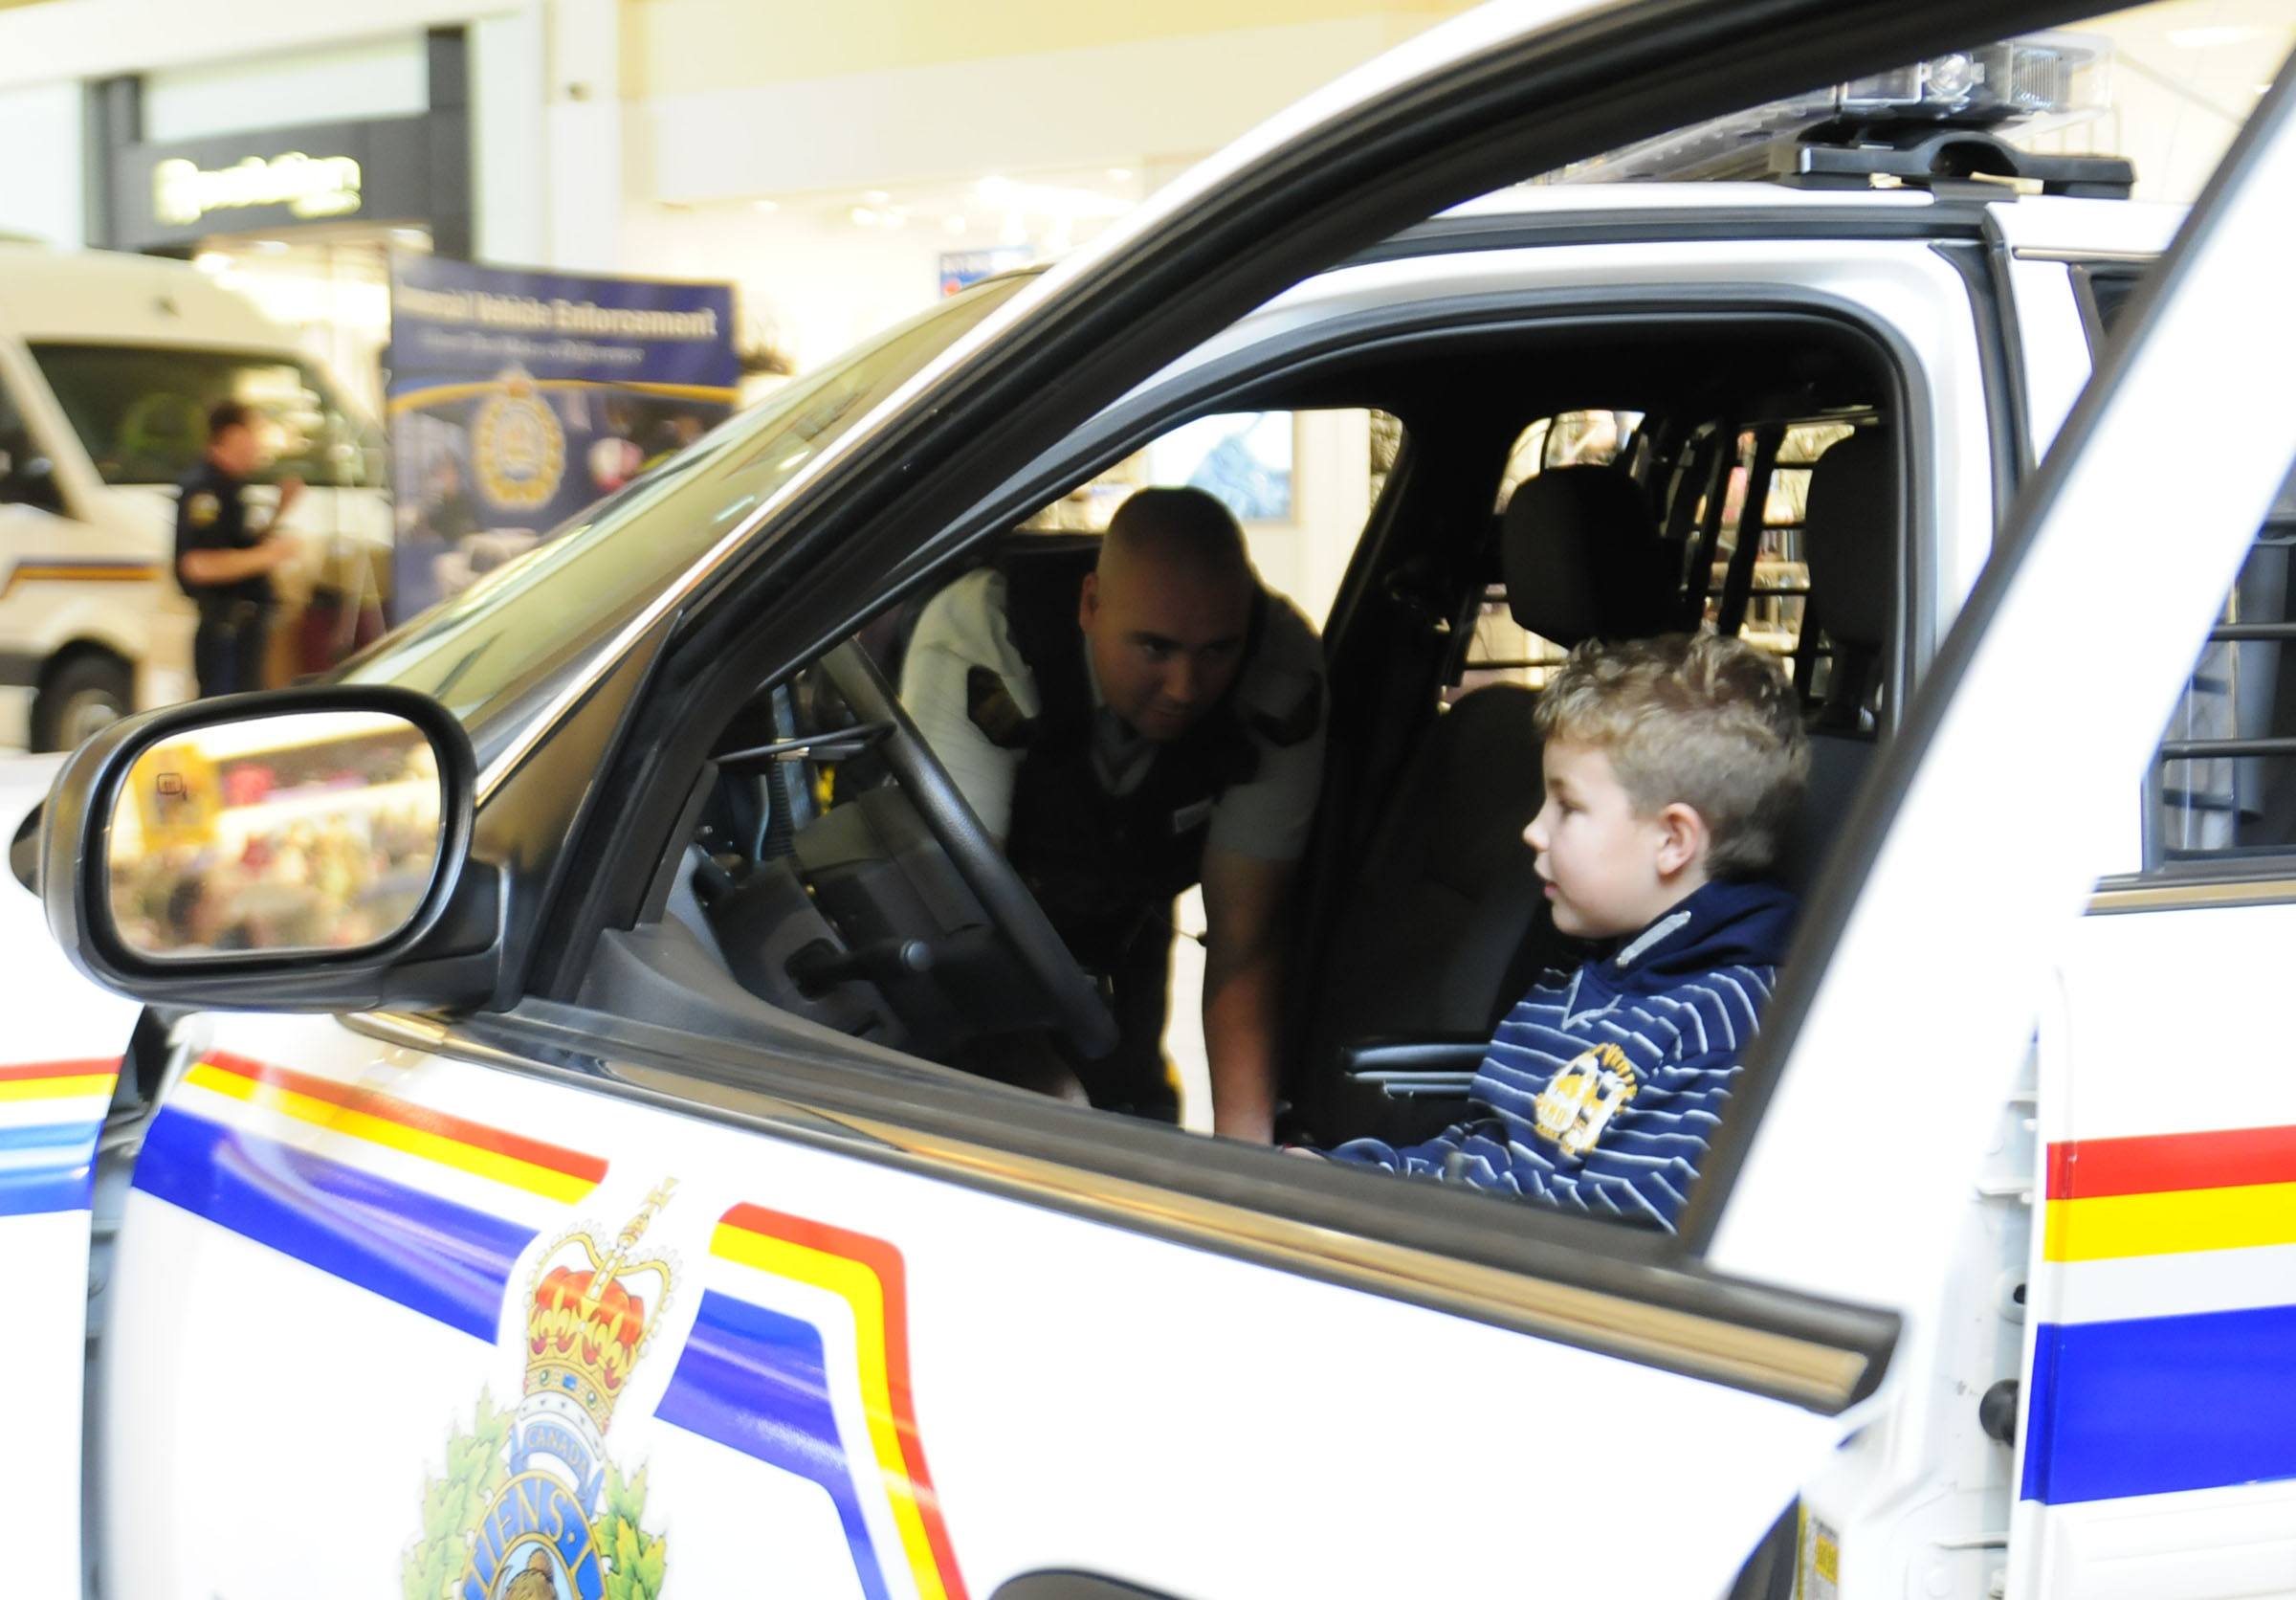 The Alberta Motor Association and partner organizations launched Red Deer Traffic Safety Week at Bower Place Shopping Centre Saturday with displays on important traffic safety issues. Jonas Madlung